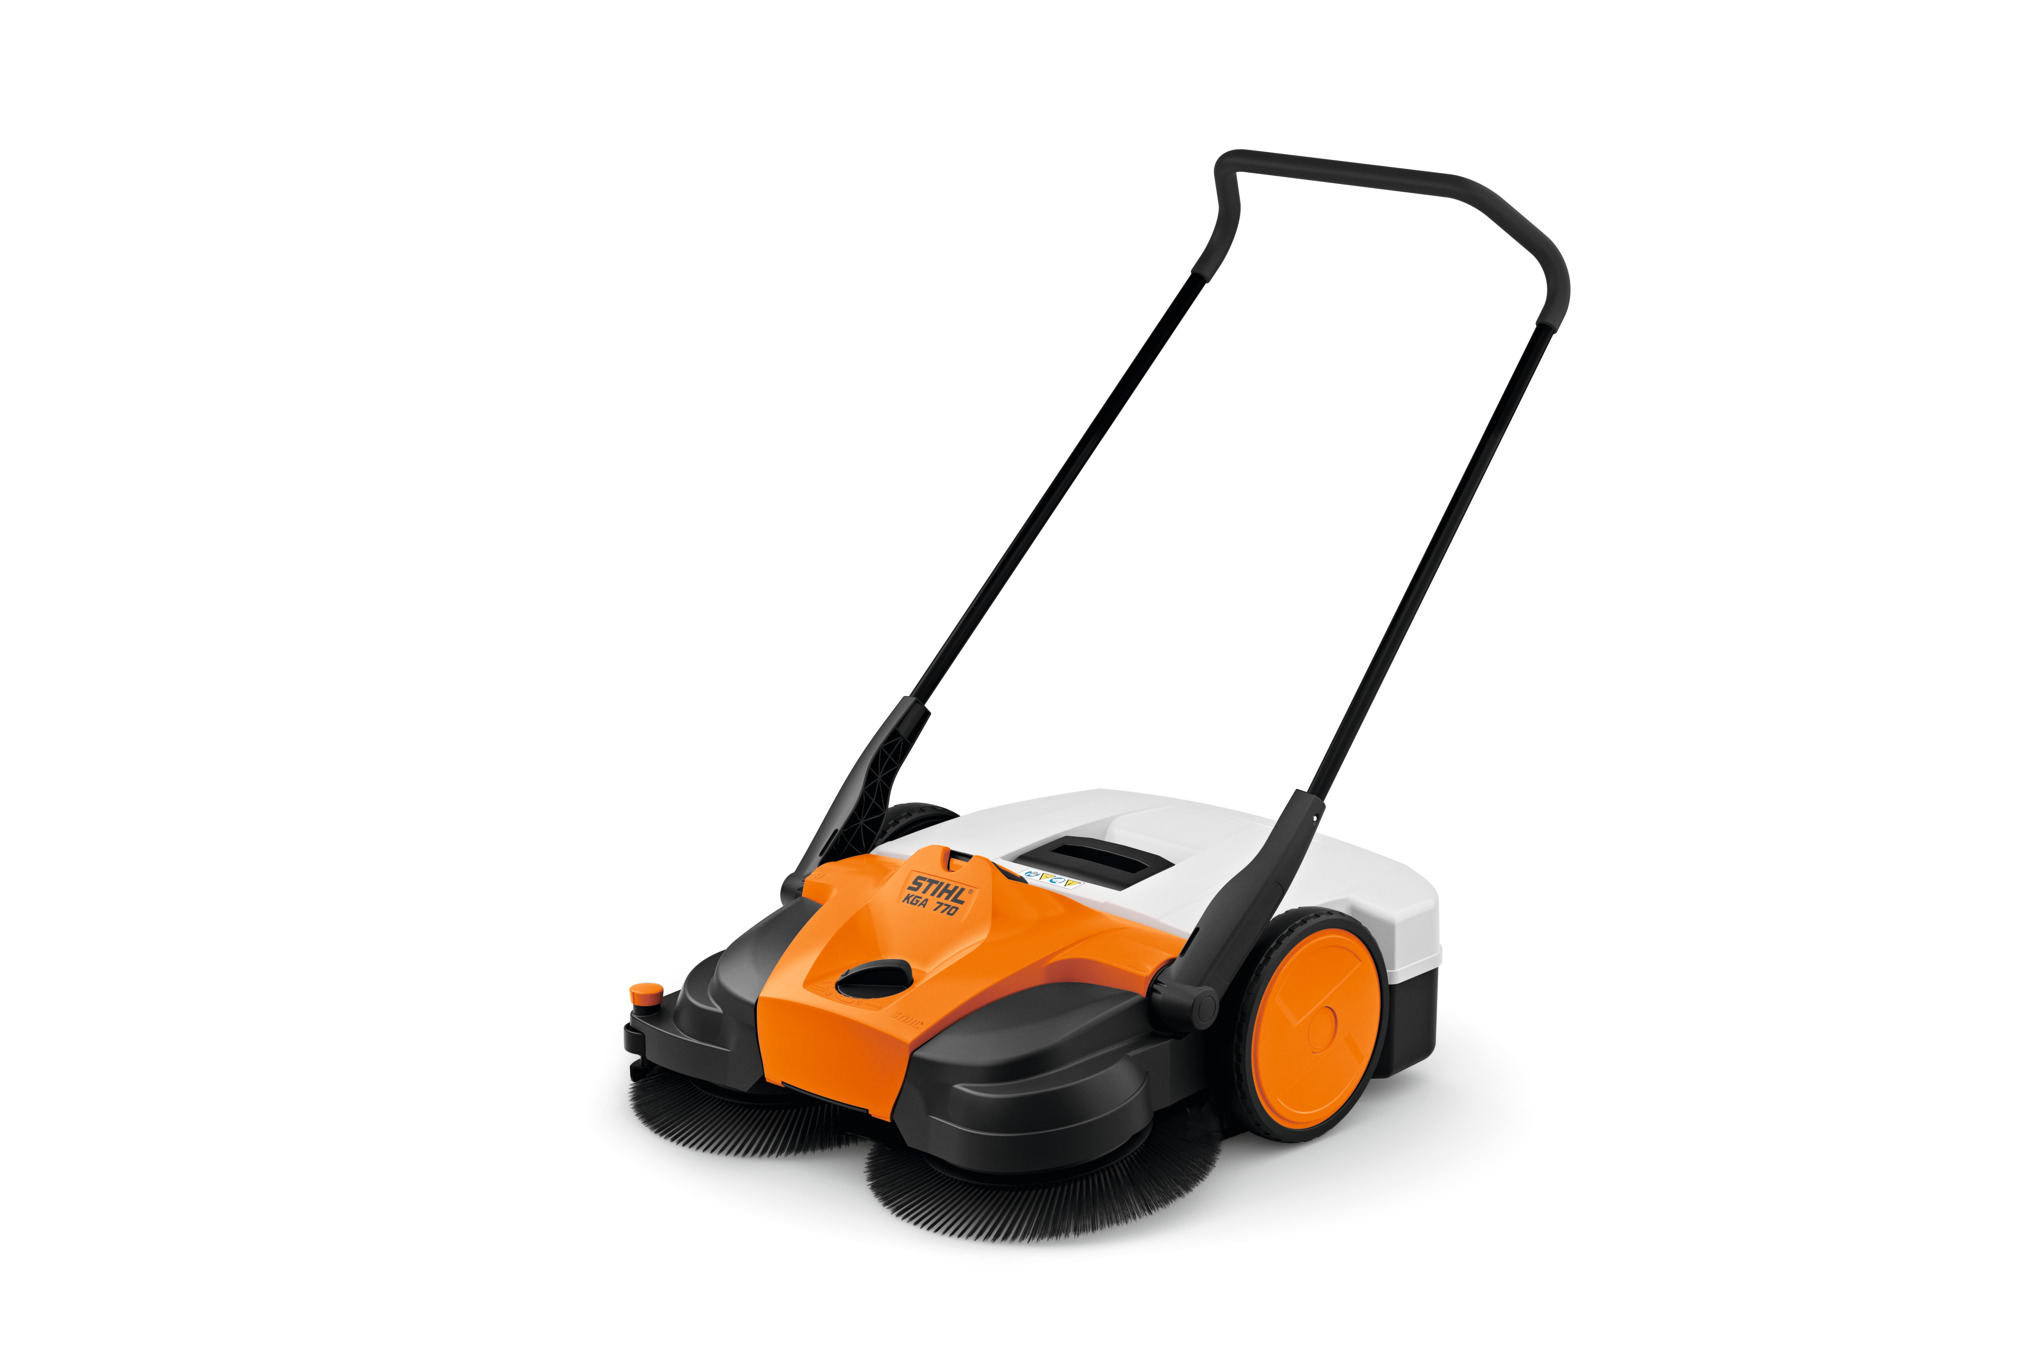 STIHL KGA 770 cordless sweeping machines from the AP-System